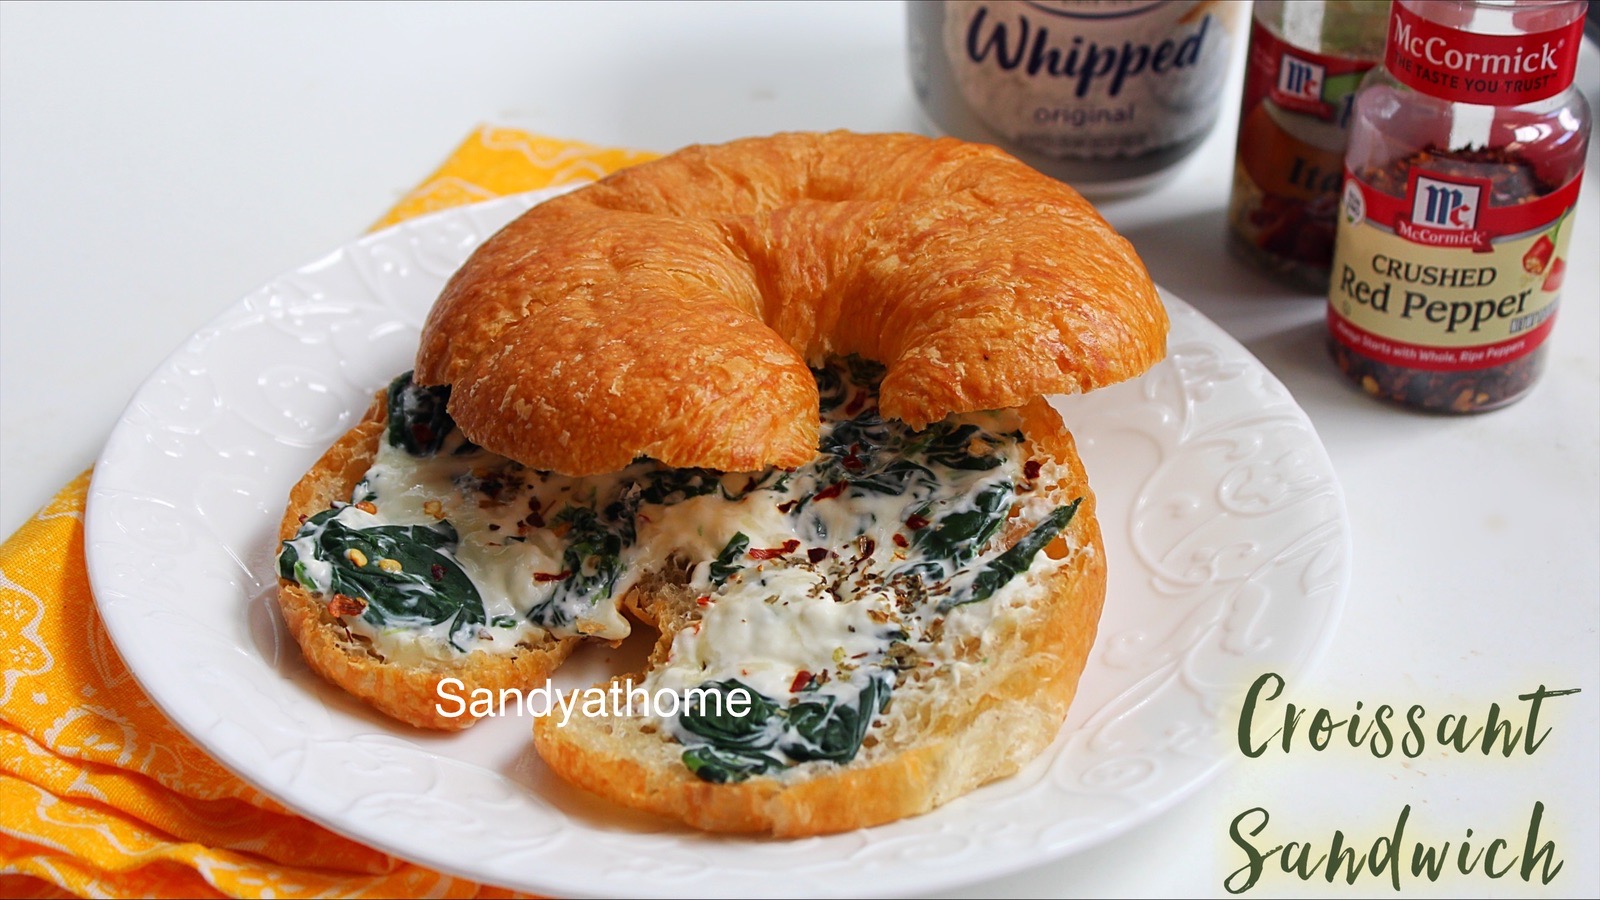 Croissant sandwich, Spinach and cheese croissant